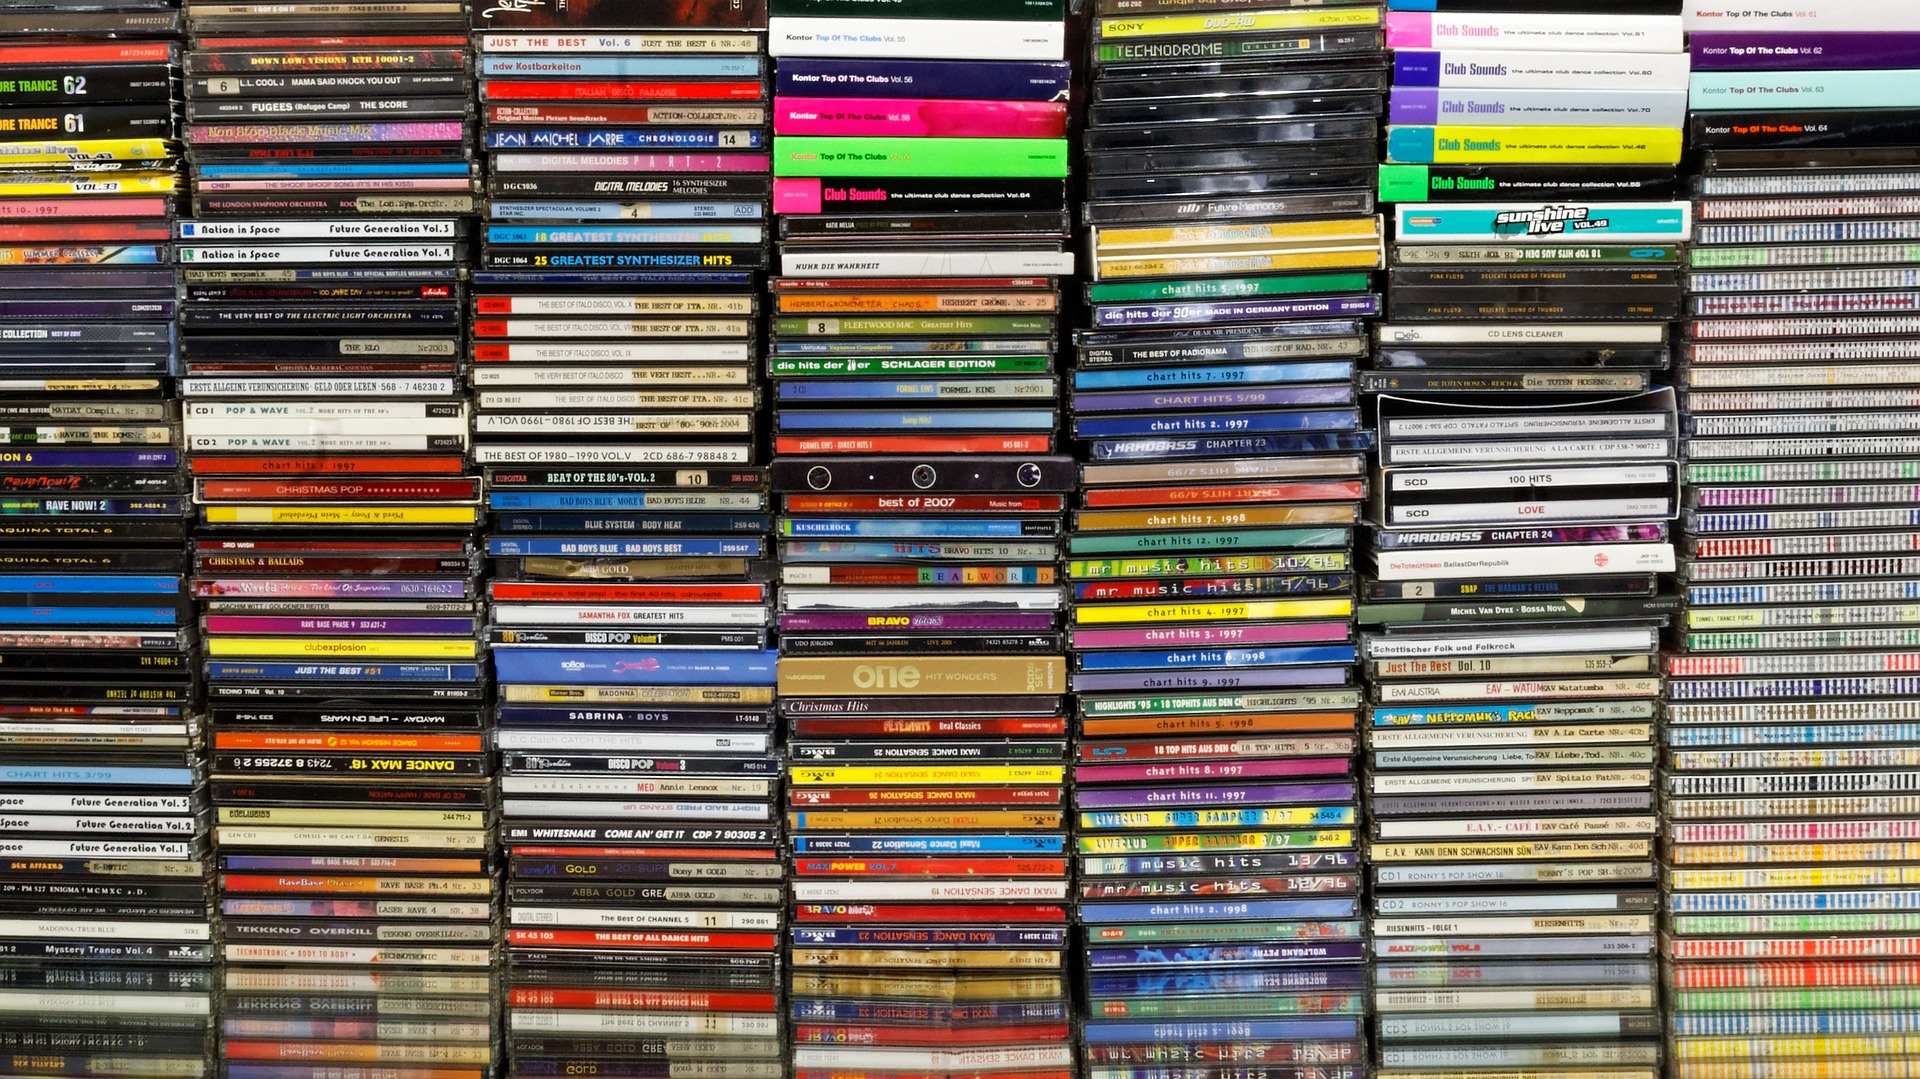 Counterfeit CDs still causing major issues for music industry